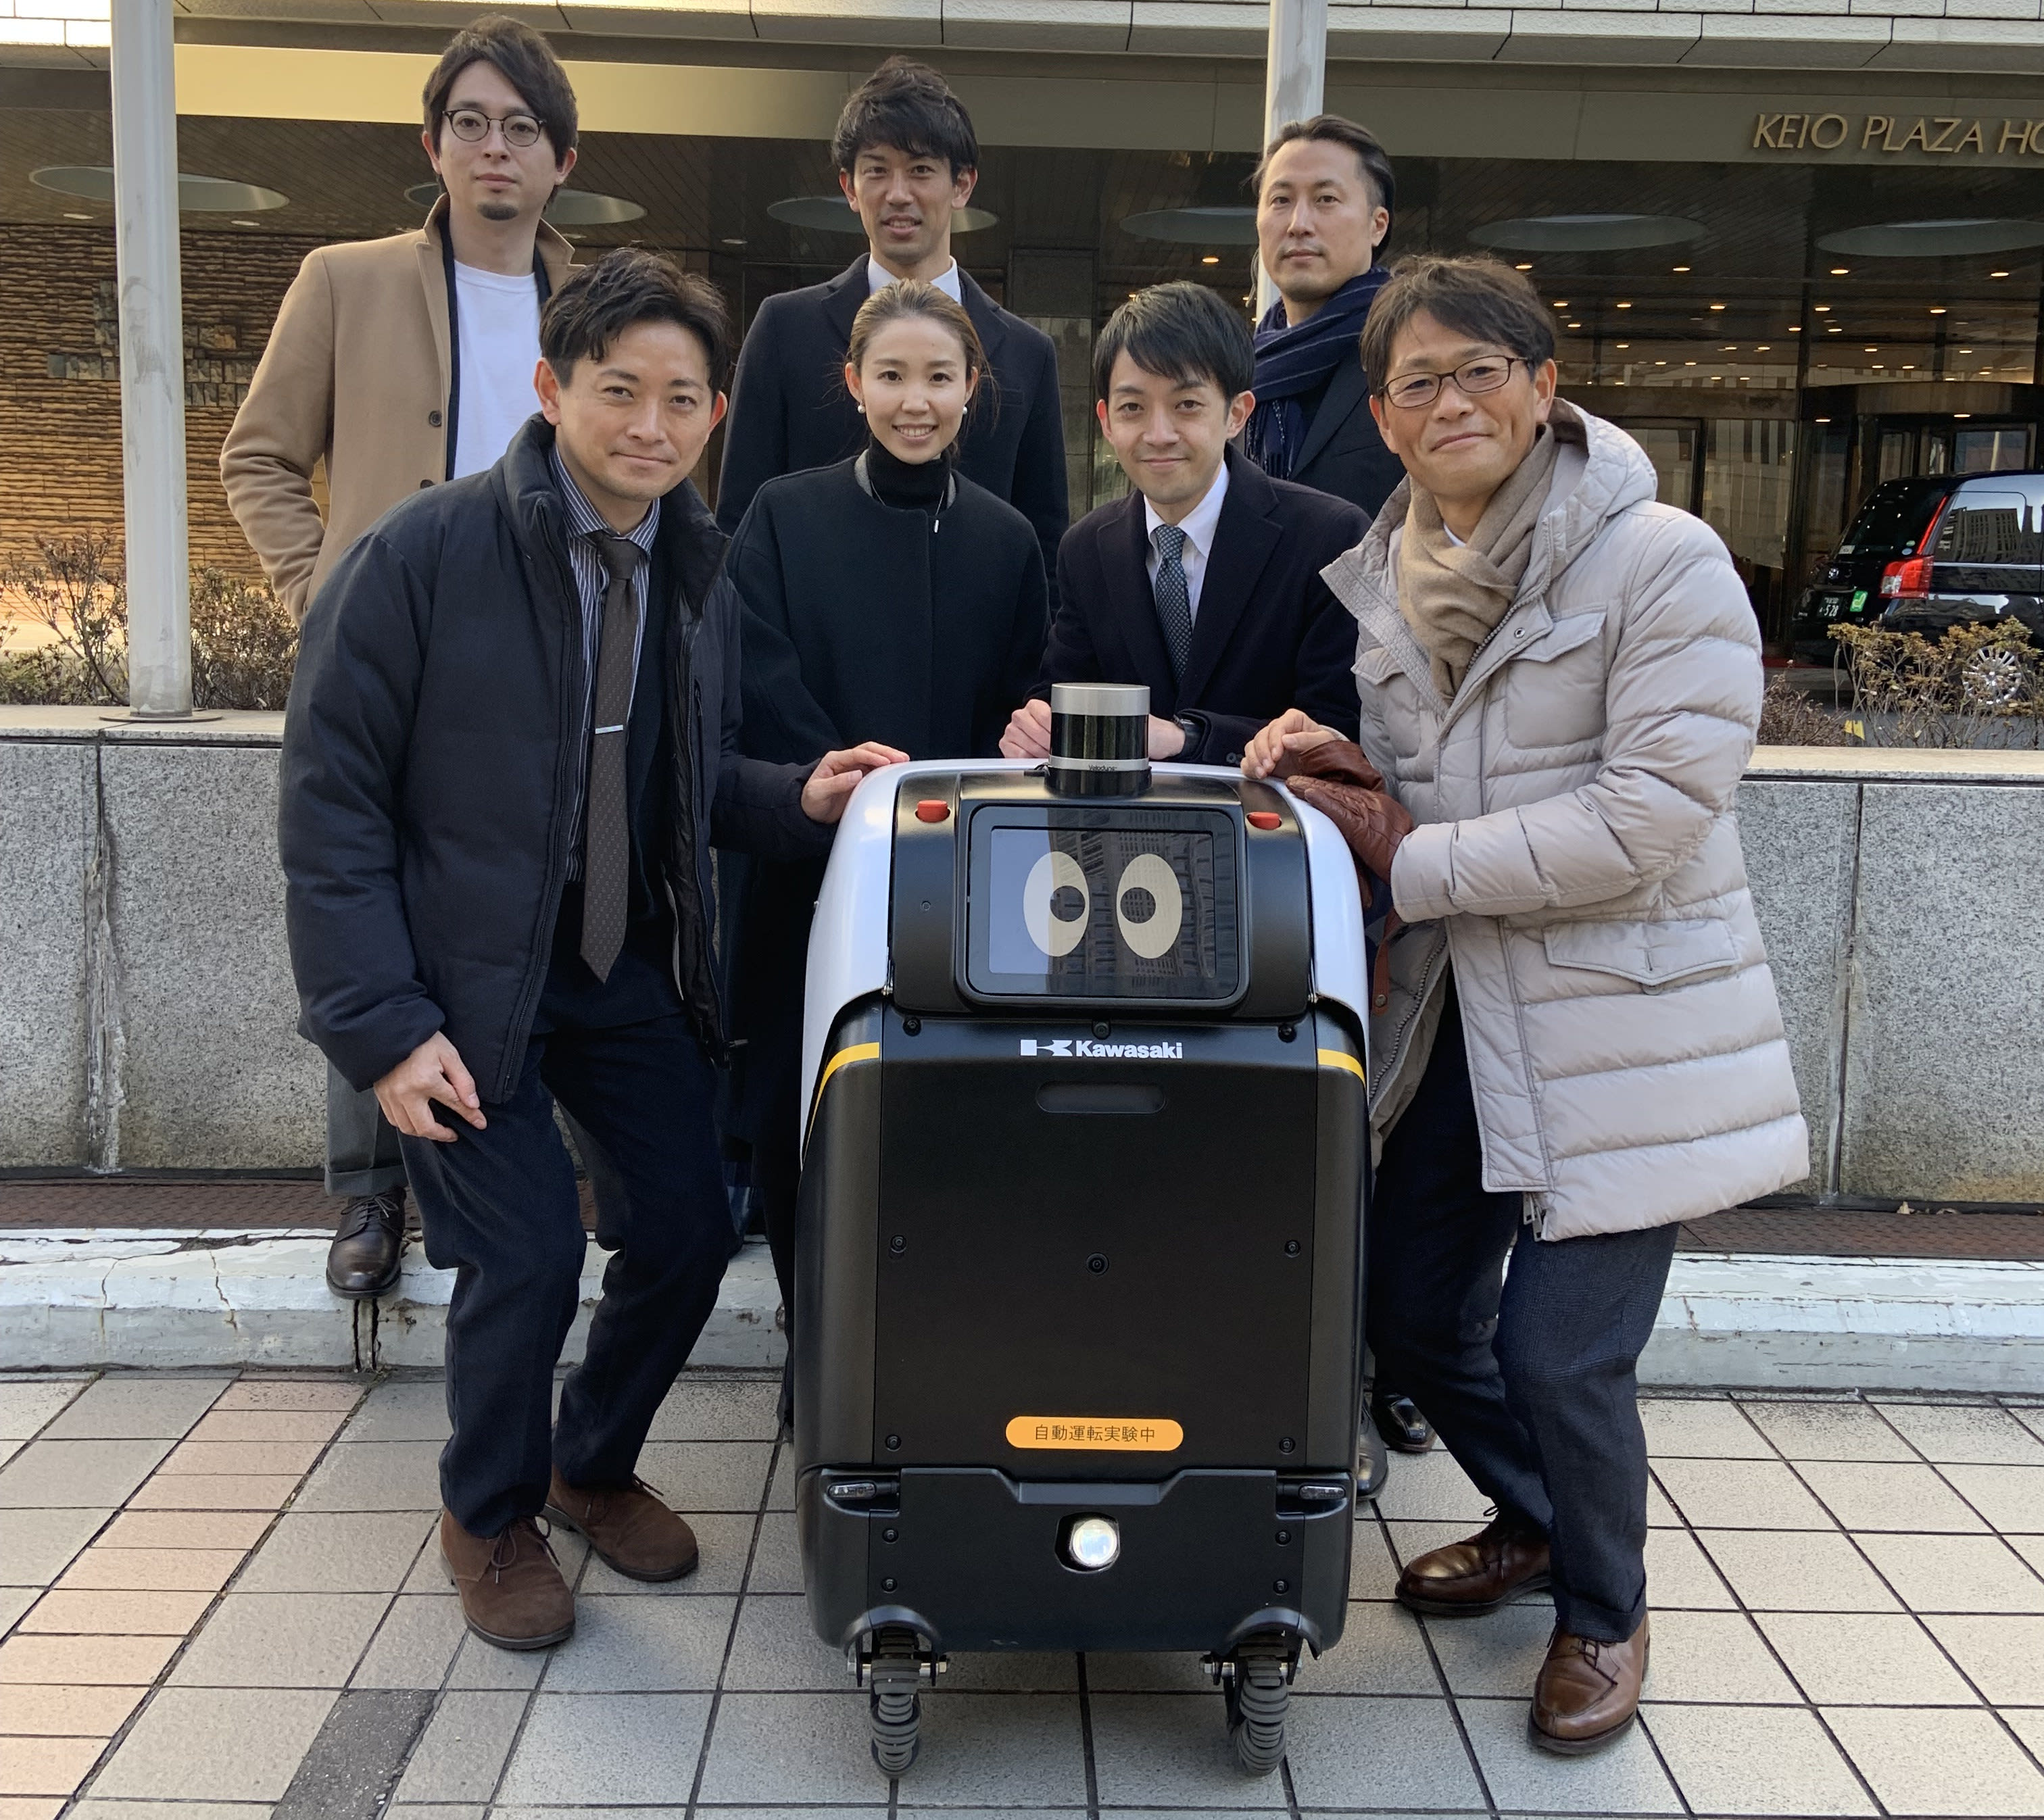 The Takeda team in Japan proudly posing with the robot used to collect medical devices